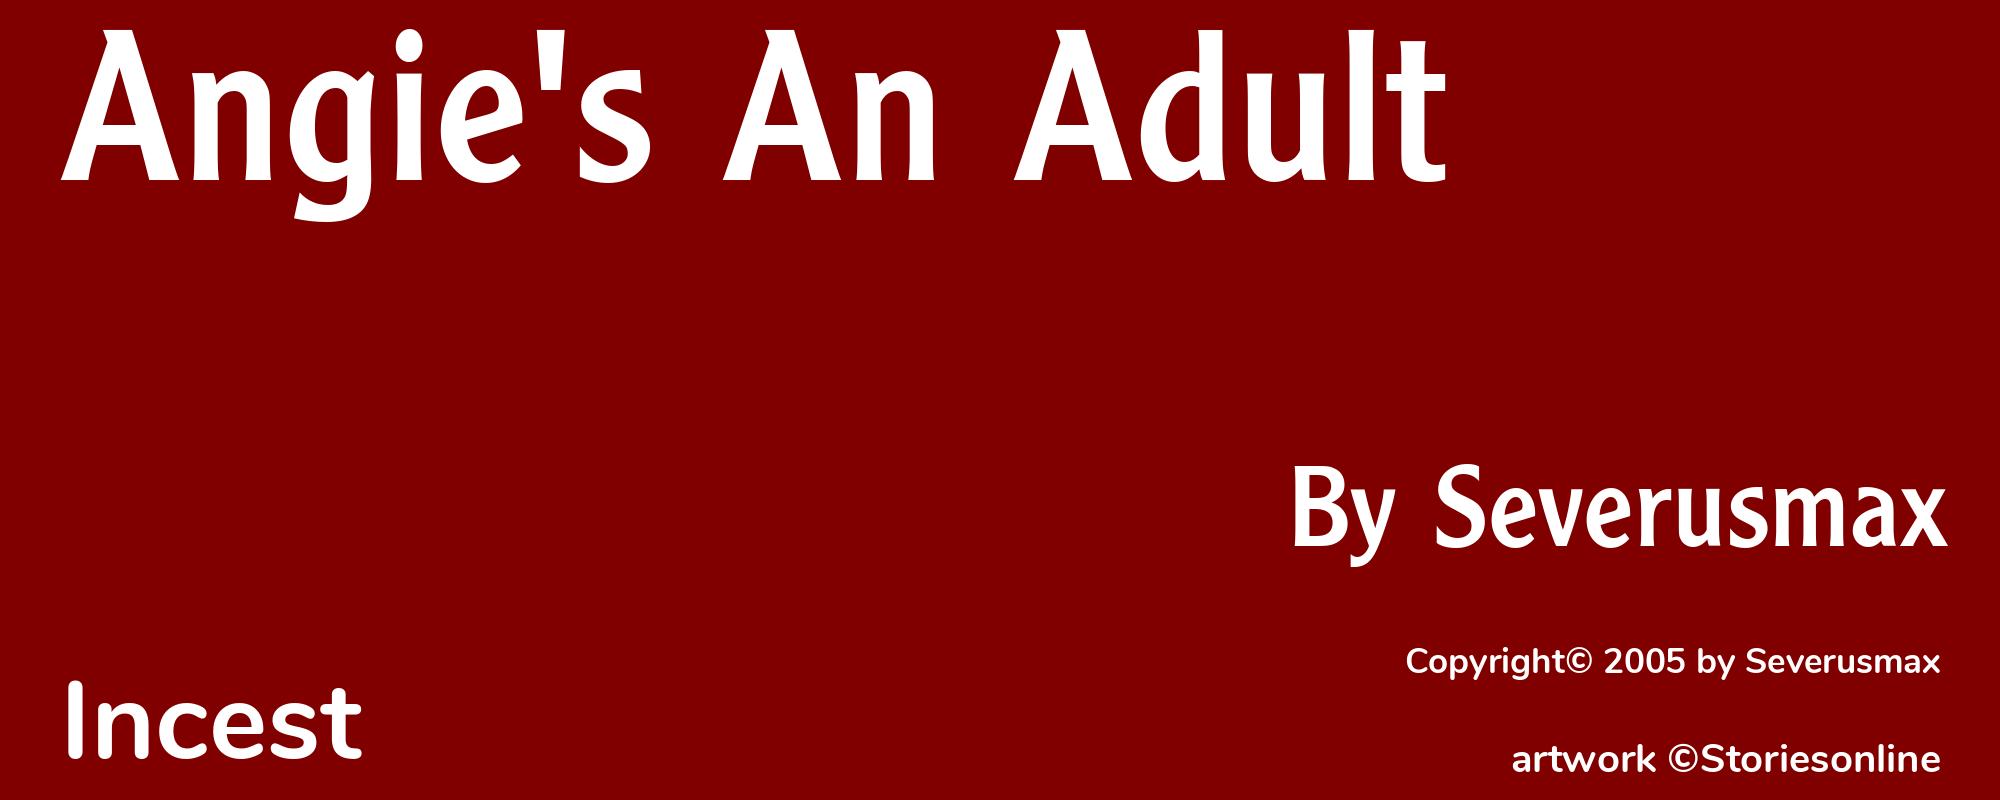 Angie's An Adult - Cover